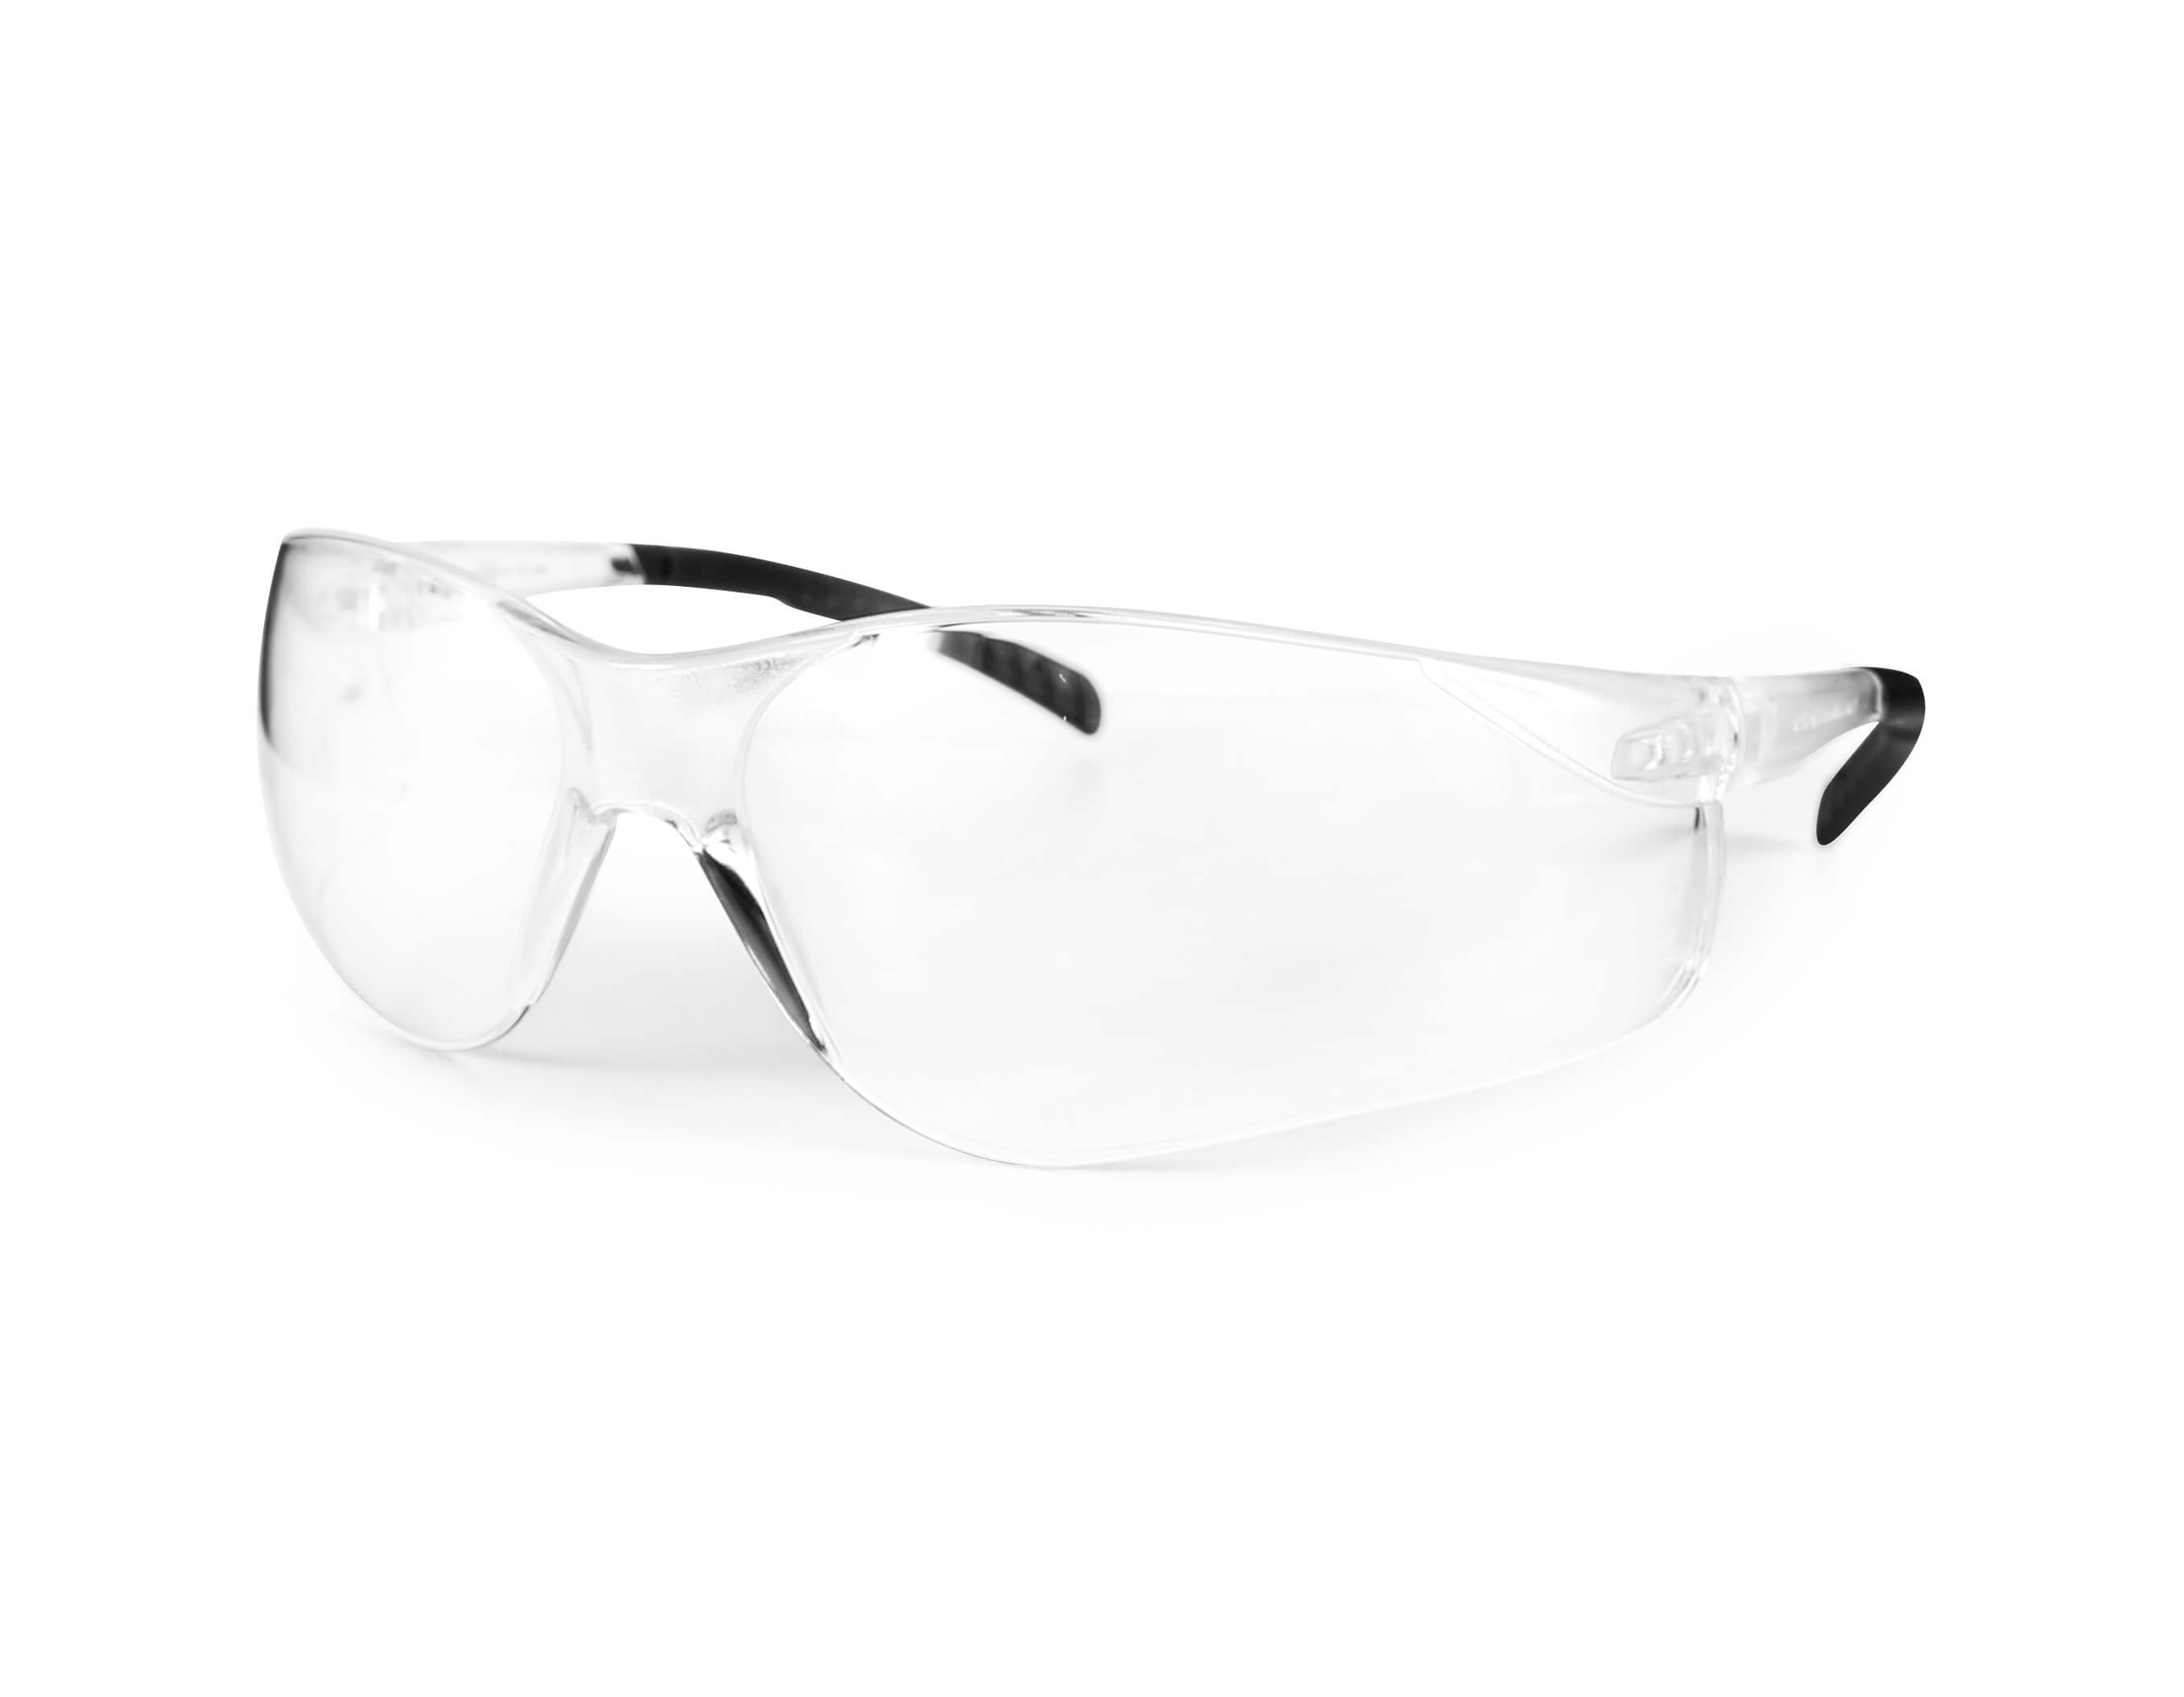 FISSION SAFETY GLASSES - BLK TMPL/CLEAR LENS